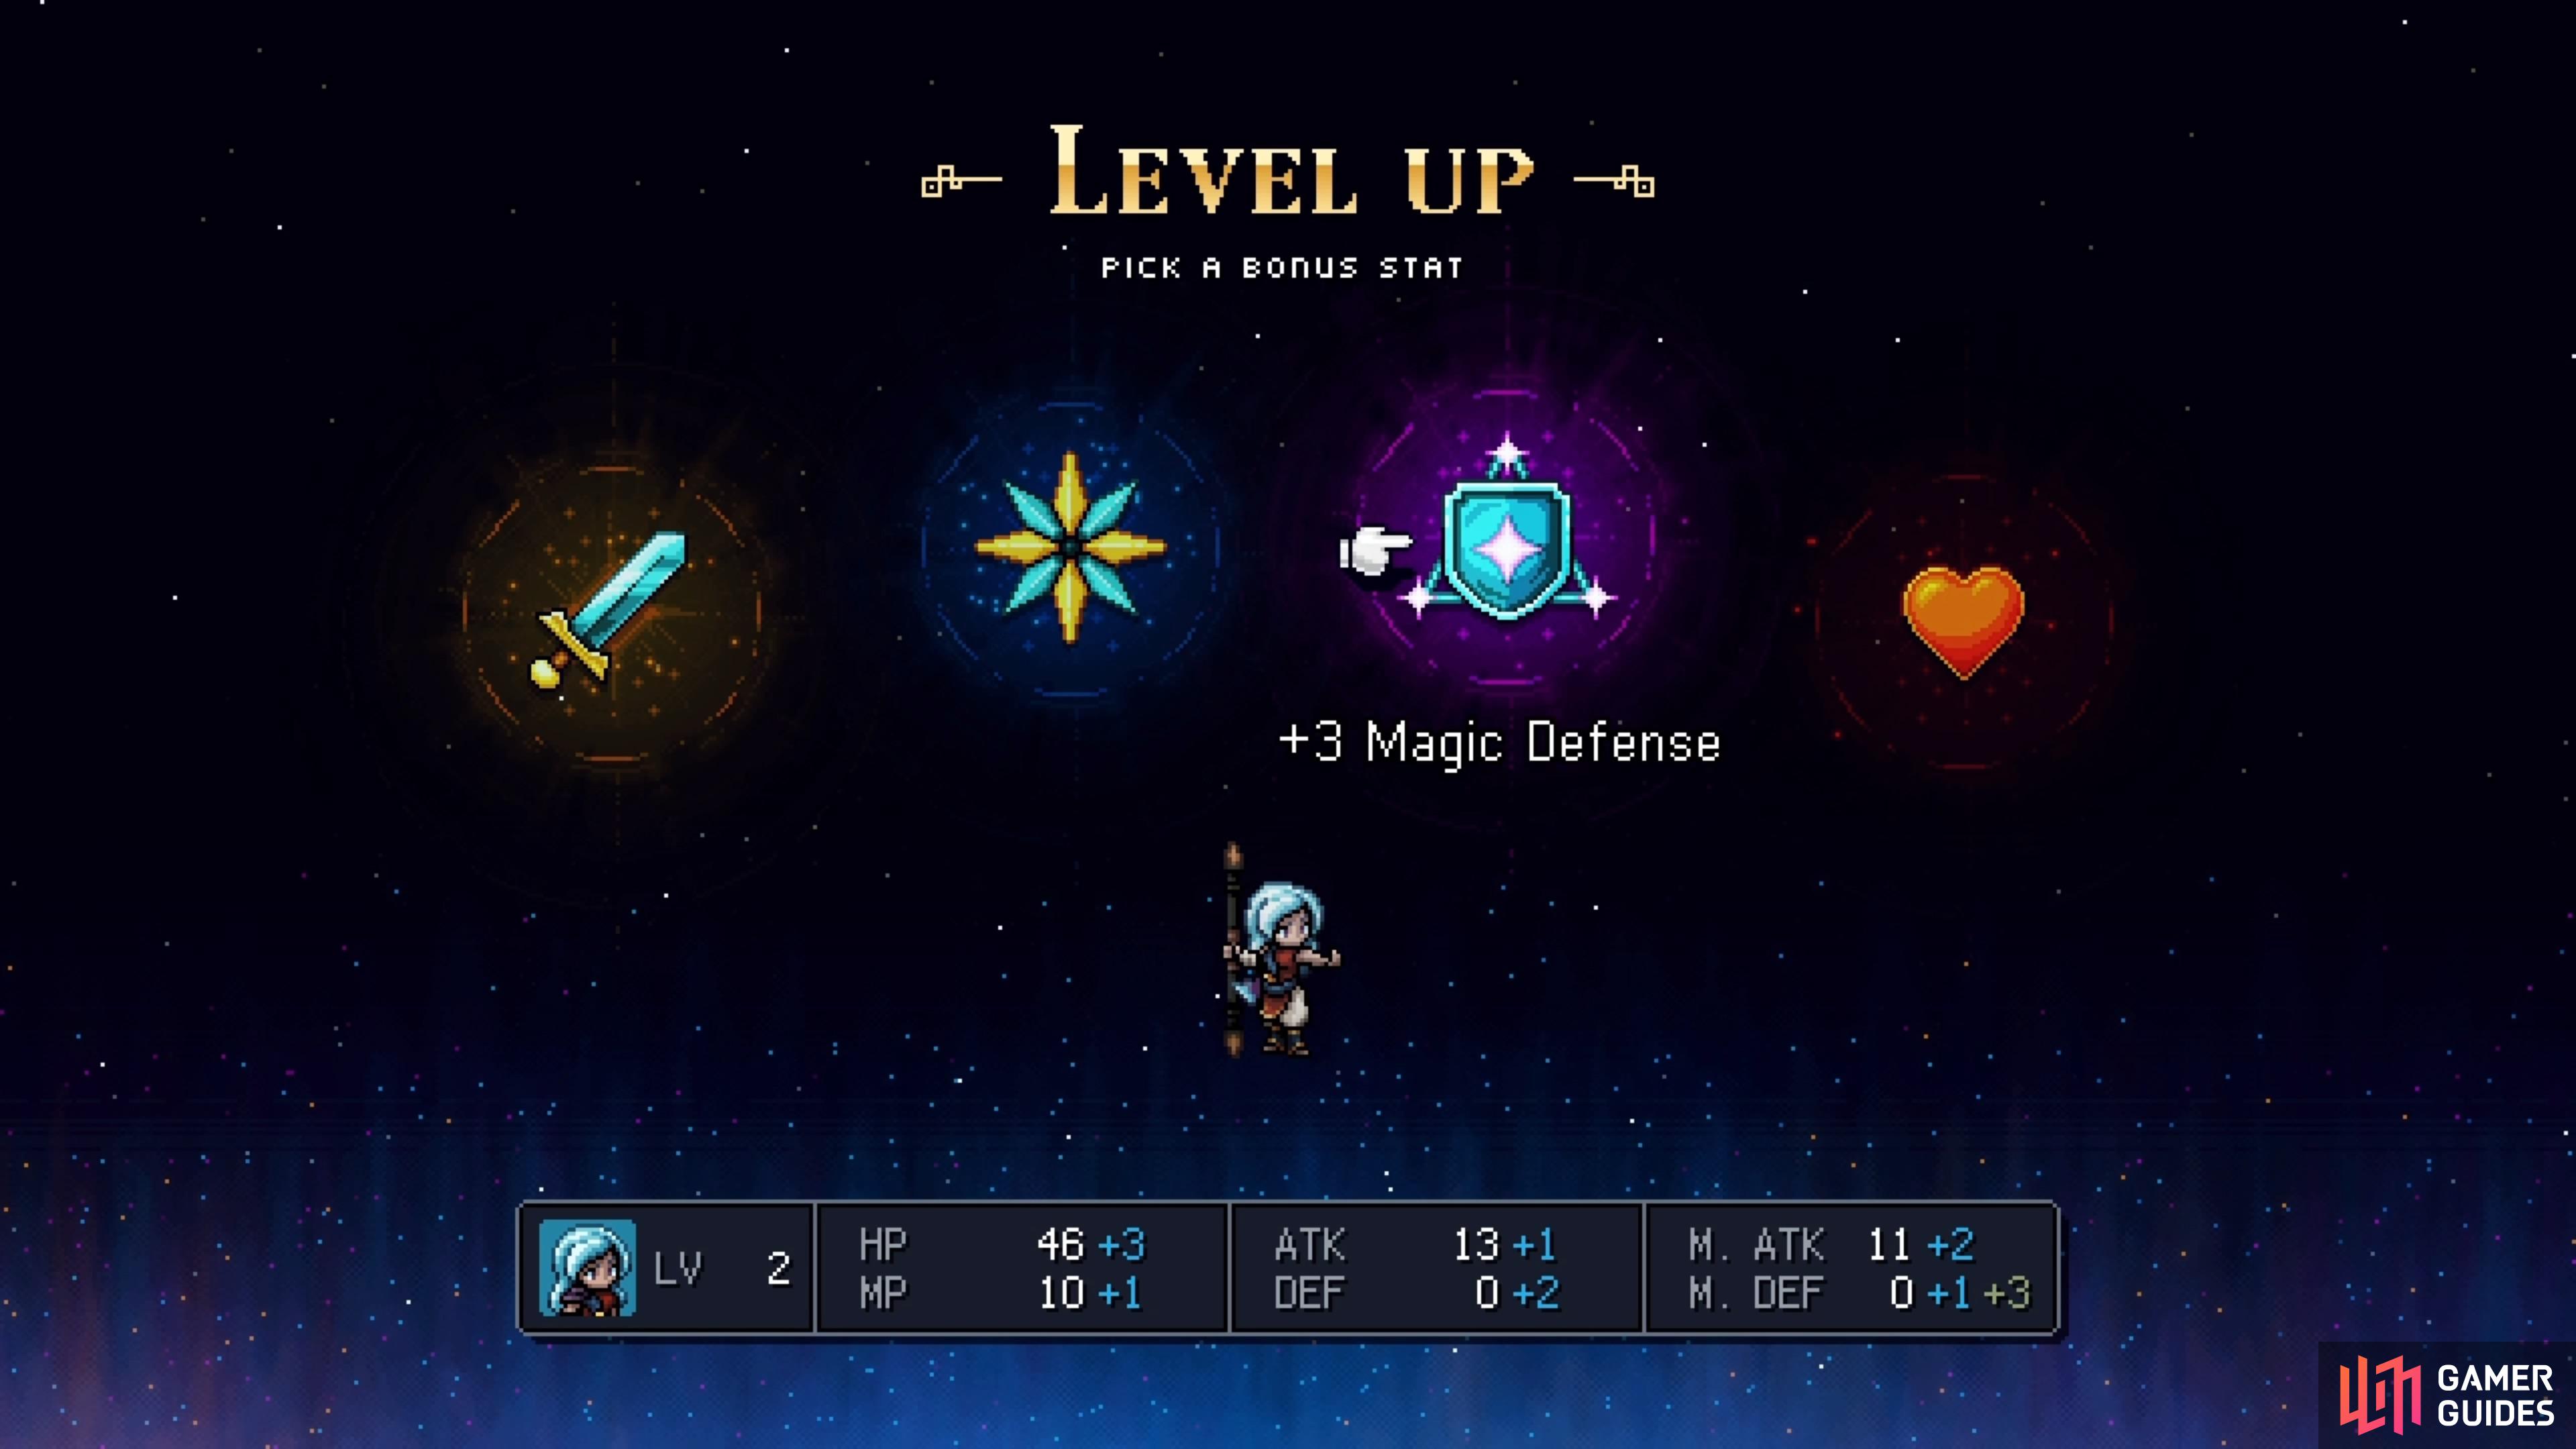 You’ll be able to choose a bonus stat increase each time you level up.